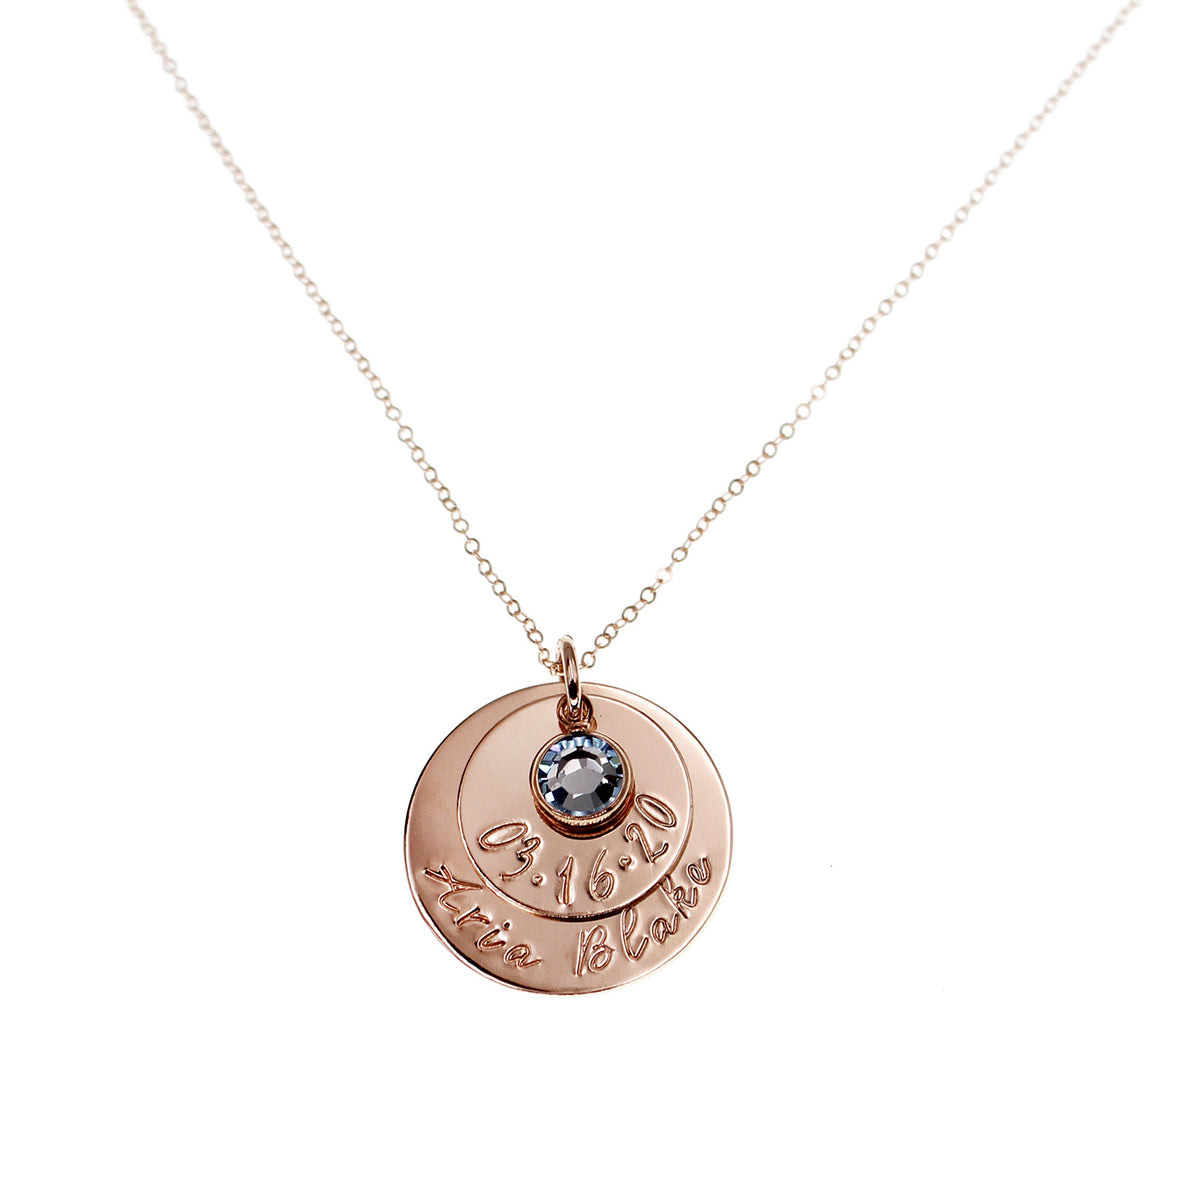 Relationship Necklace for Boyfriend - Initials & Dates | Rugged Gifts